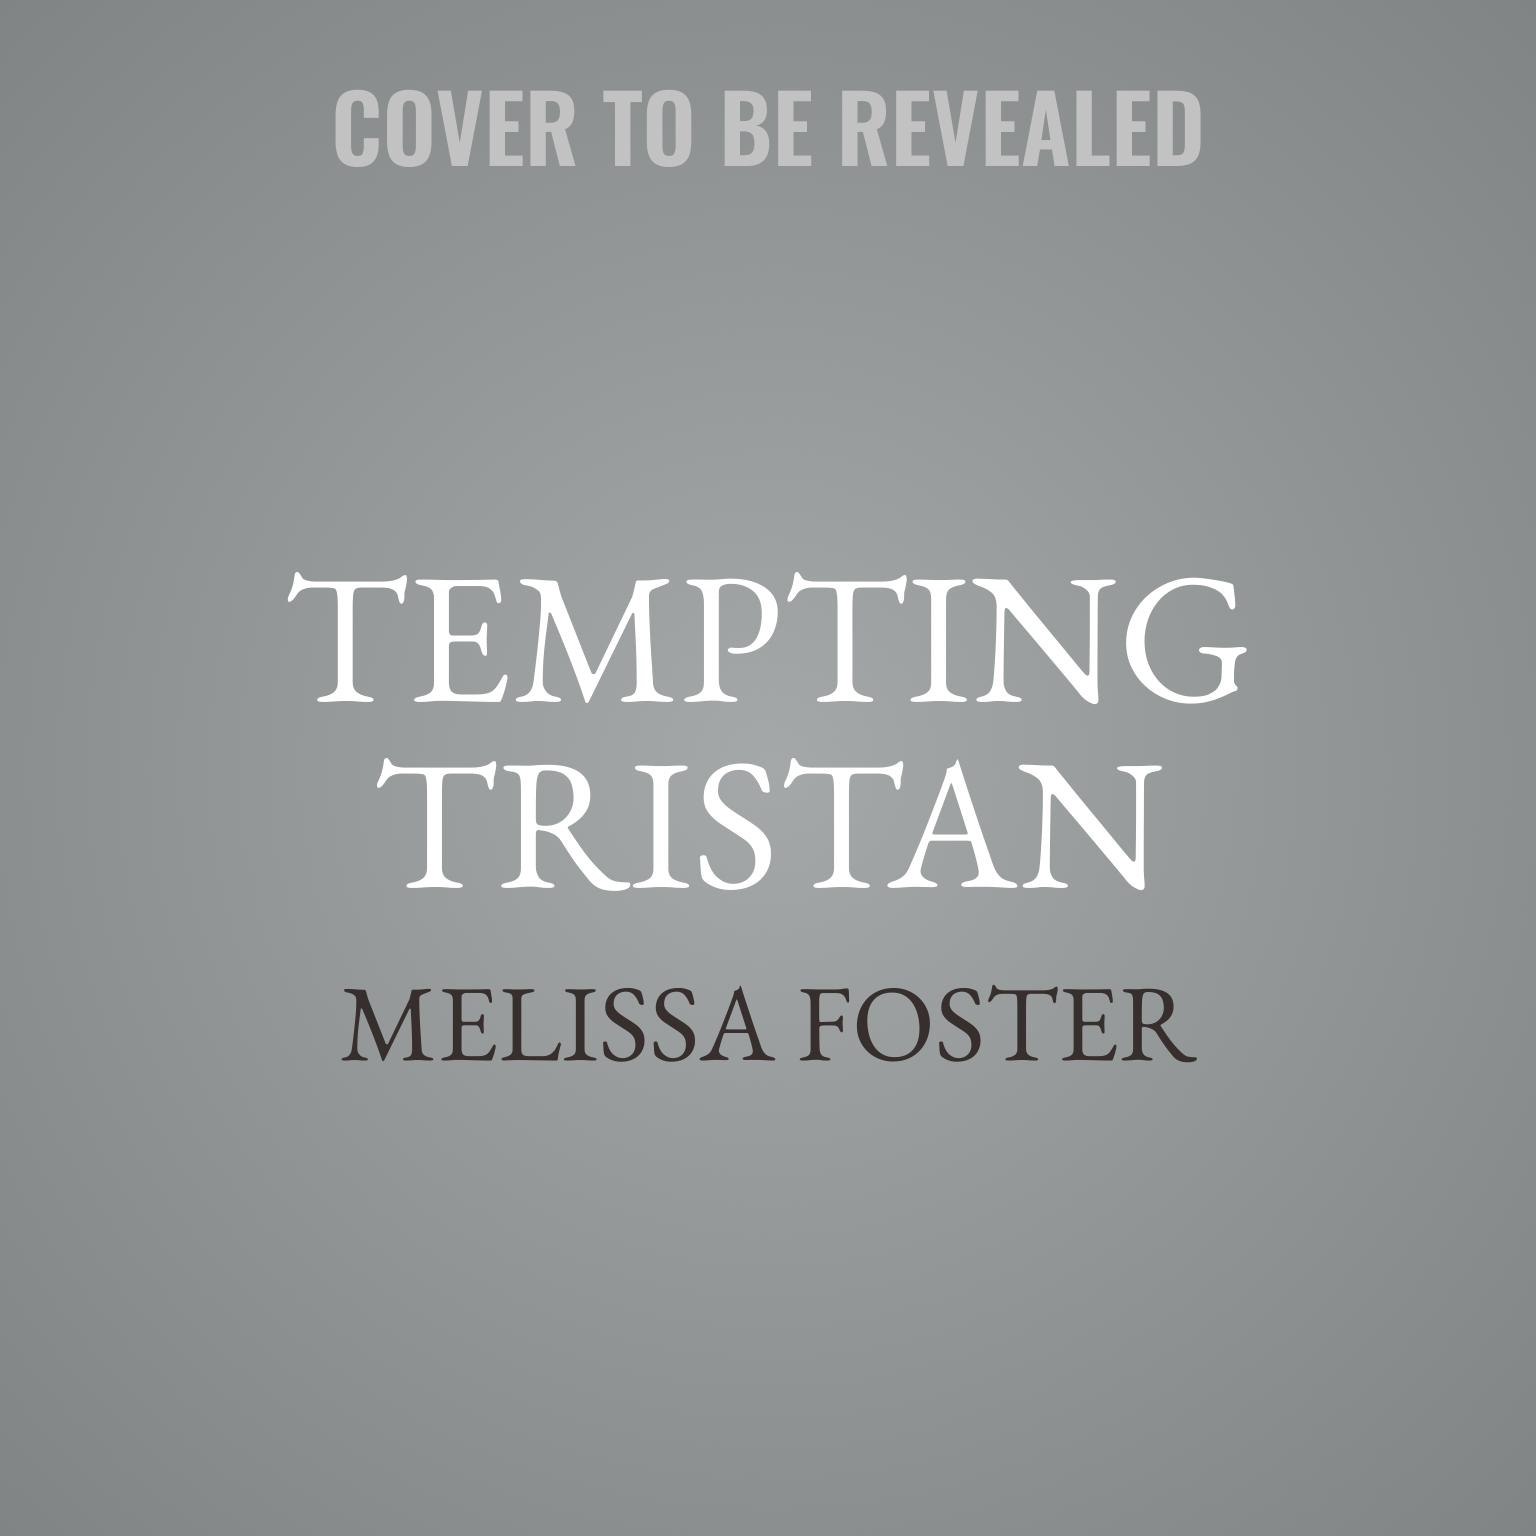 Tempting Tristan: A Steamy M/M Romance Audiobook, by Melissa Foster